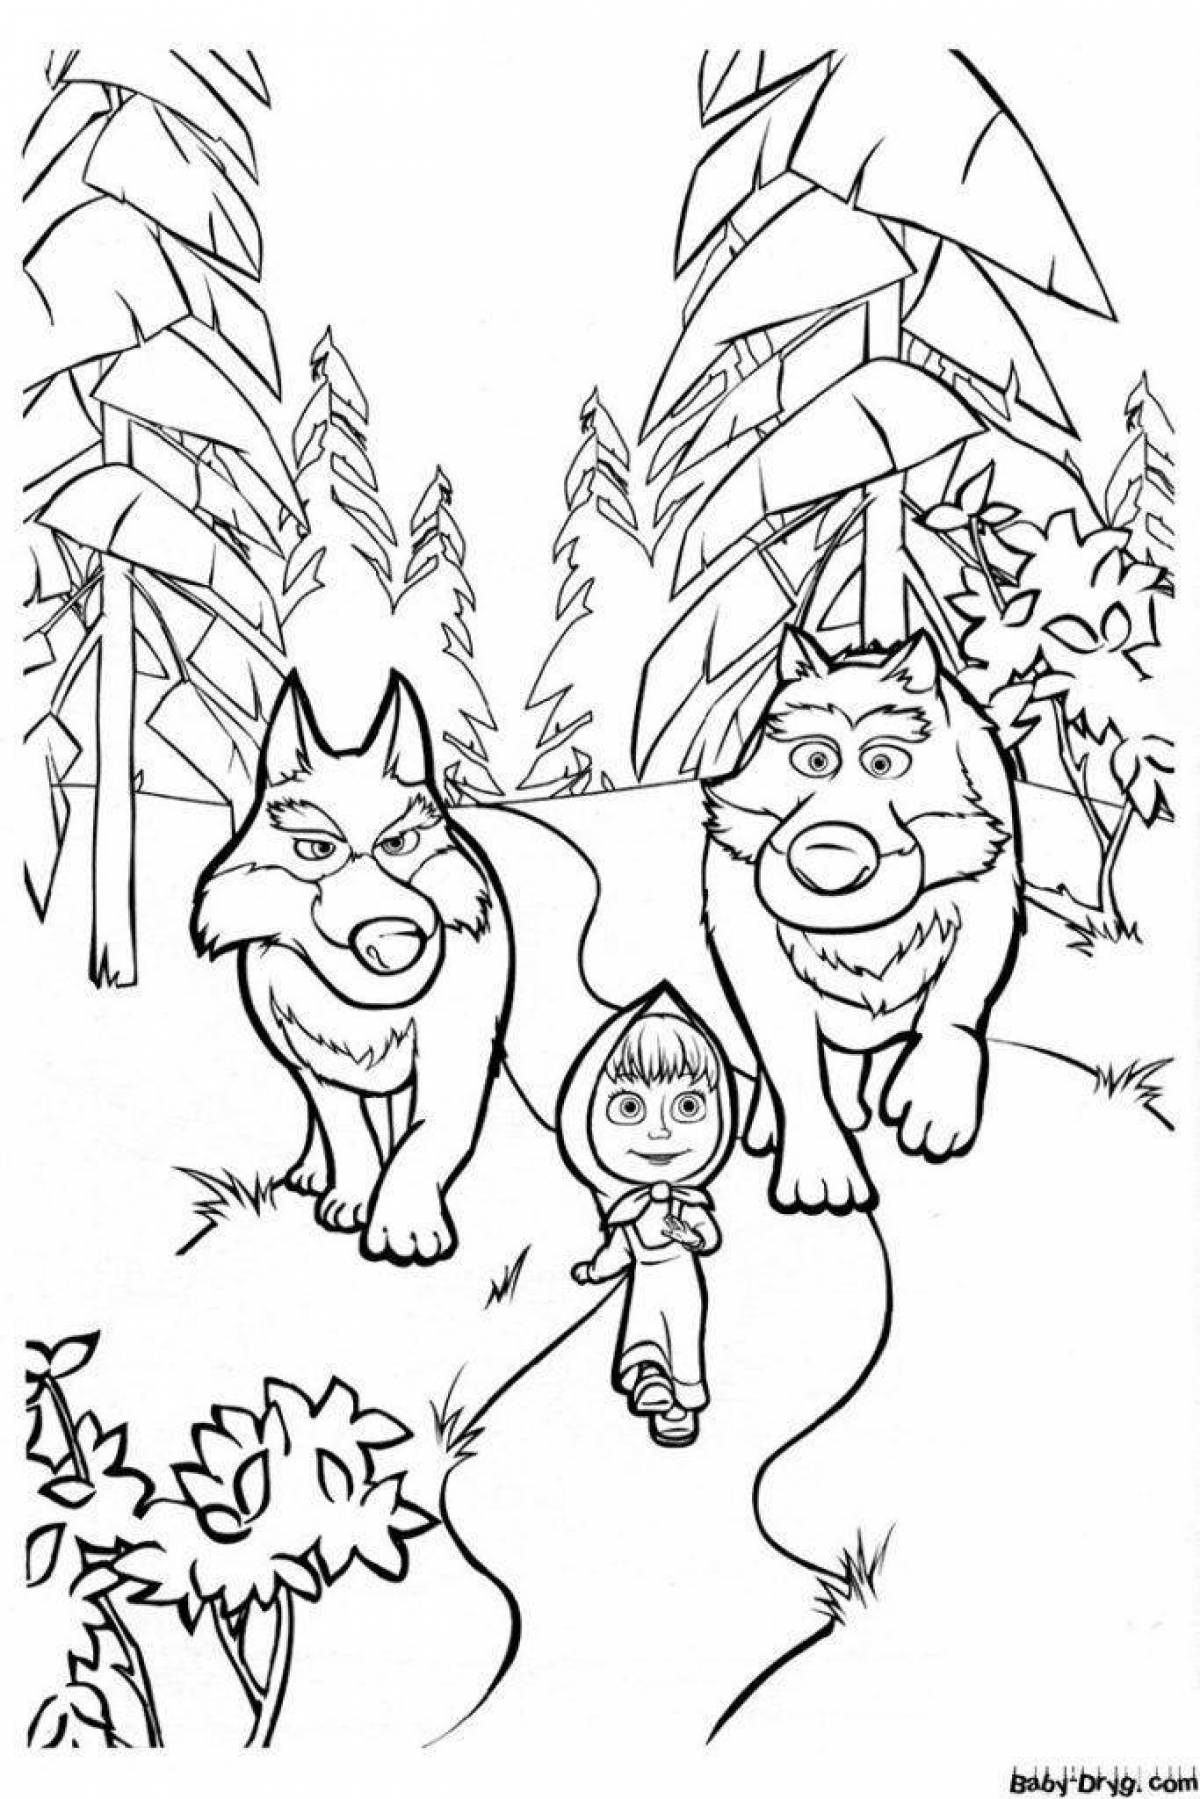 Rampant Christmas wolf coloring page